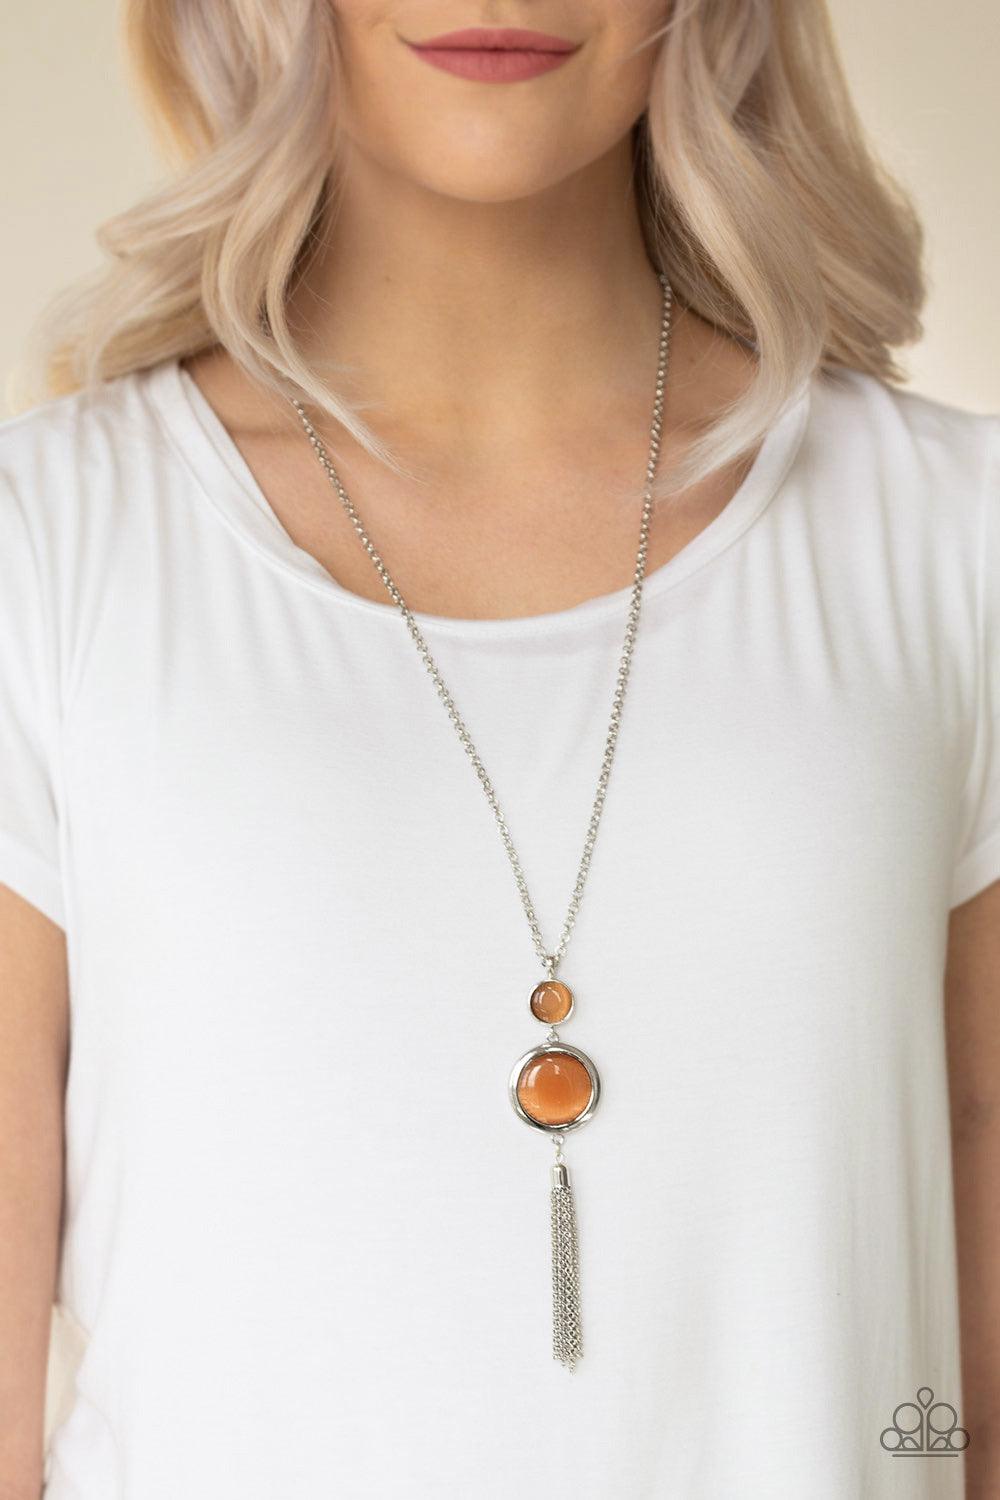 Paparazzi Accessories Have Some Common SENSE! - Orange Swinging from the bottom of a glistening silver chain, glowing stacked moonstone pendants give way to a shimmery silver tassel for a refined look. Features an adjustable clasp closure. Sold as one ind